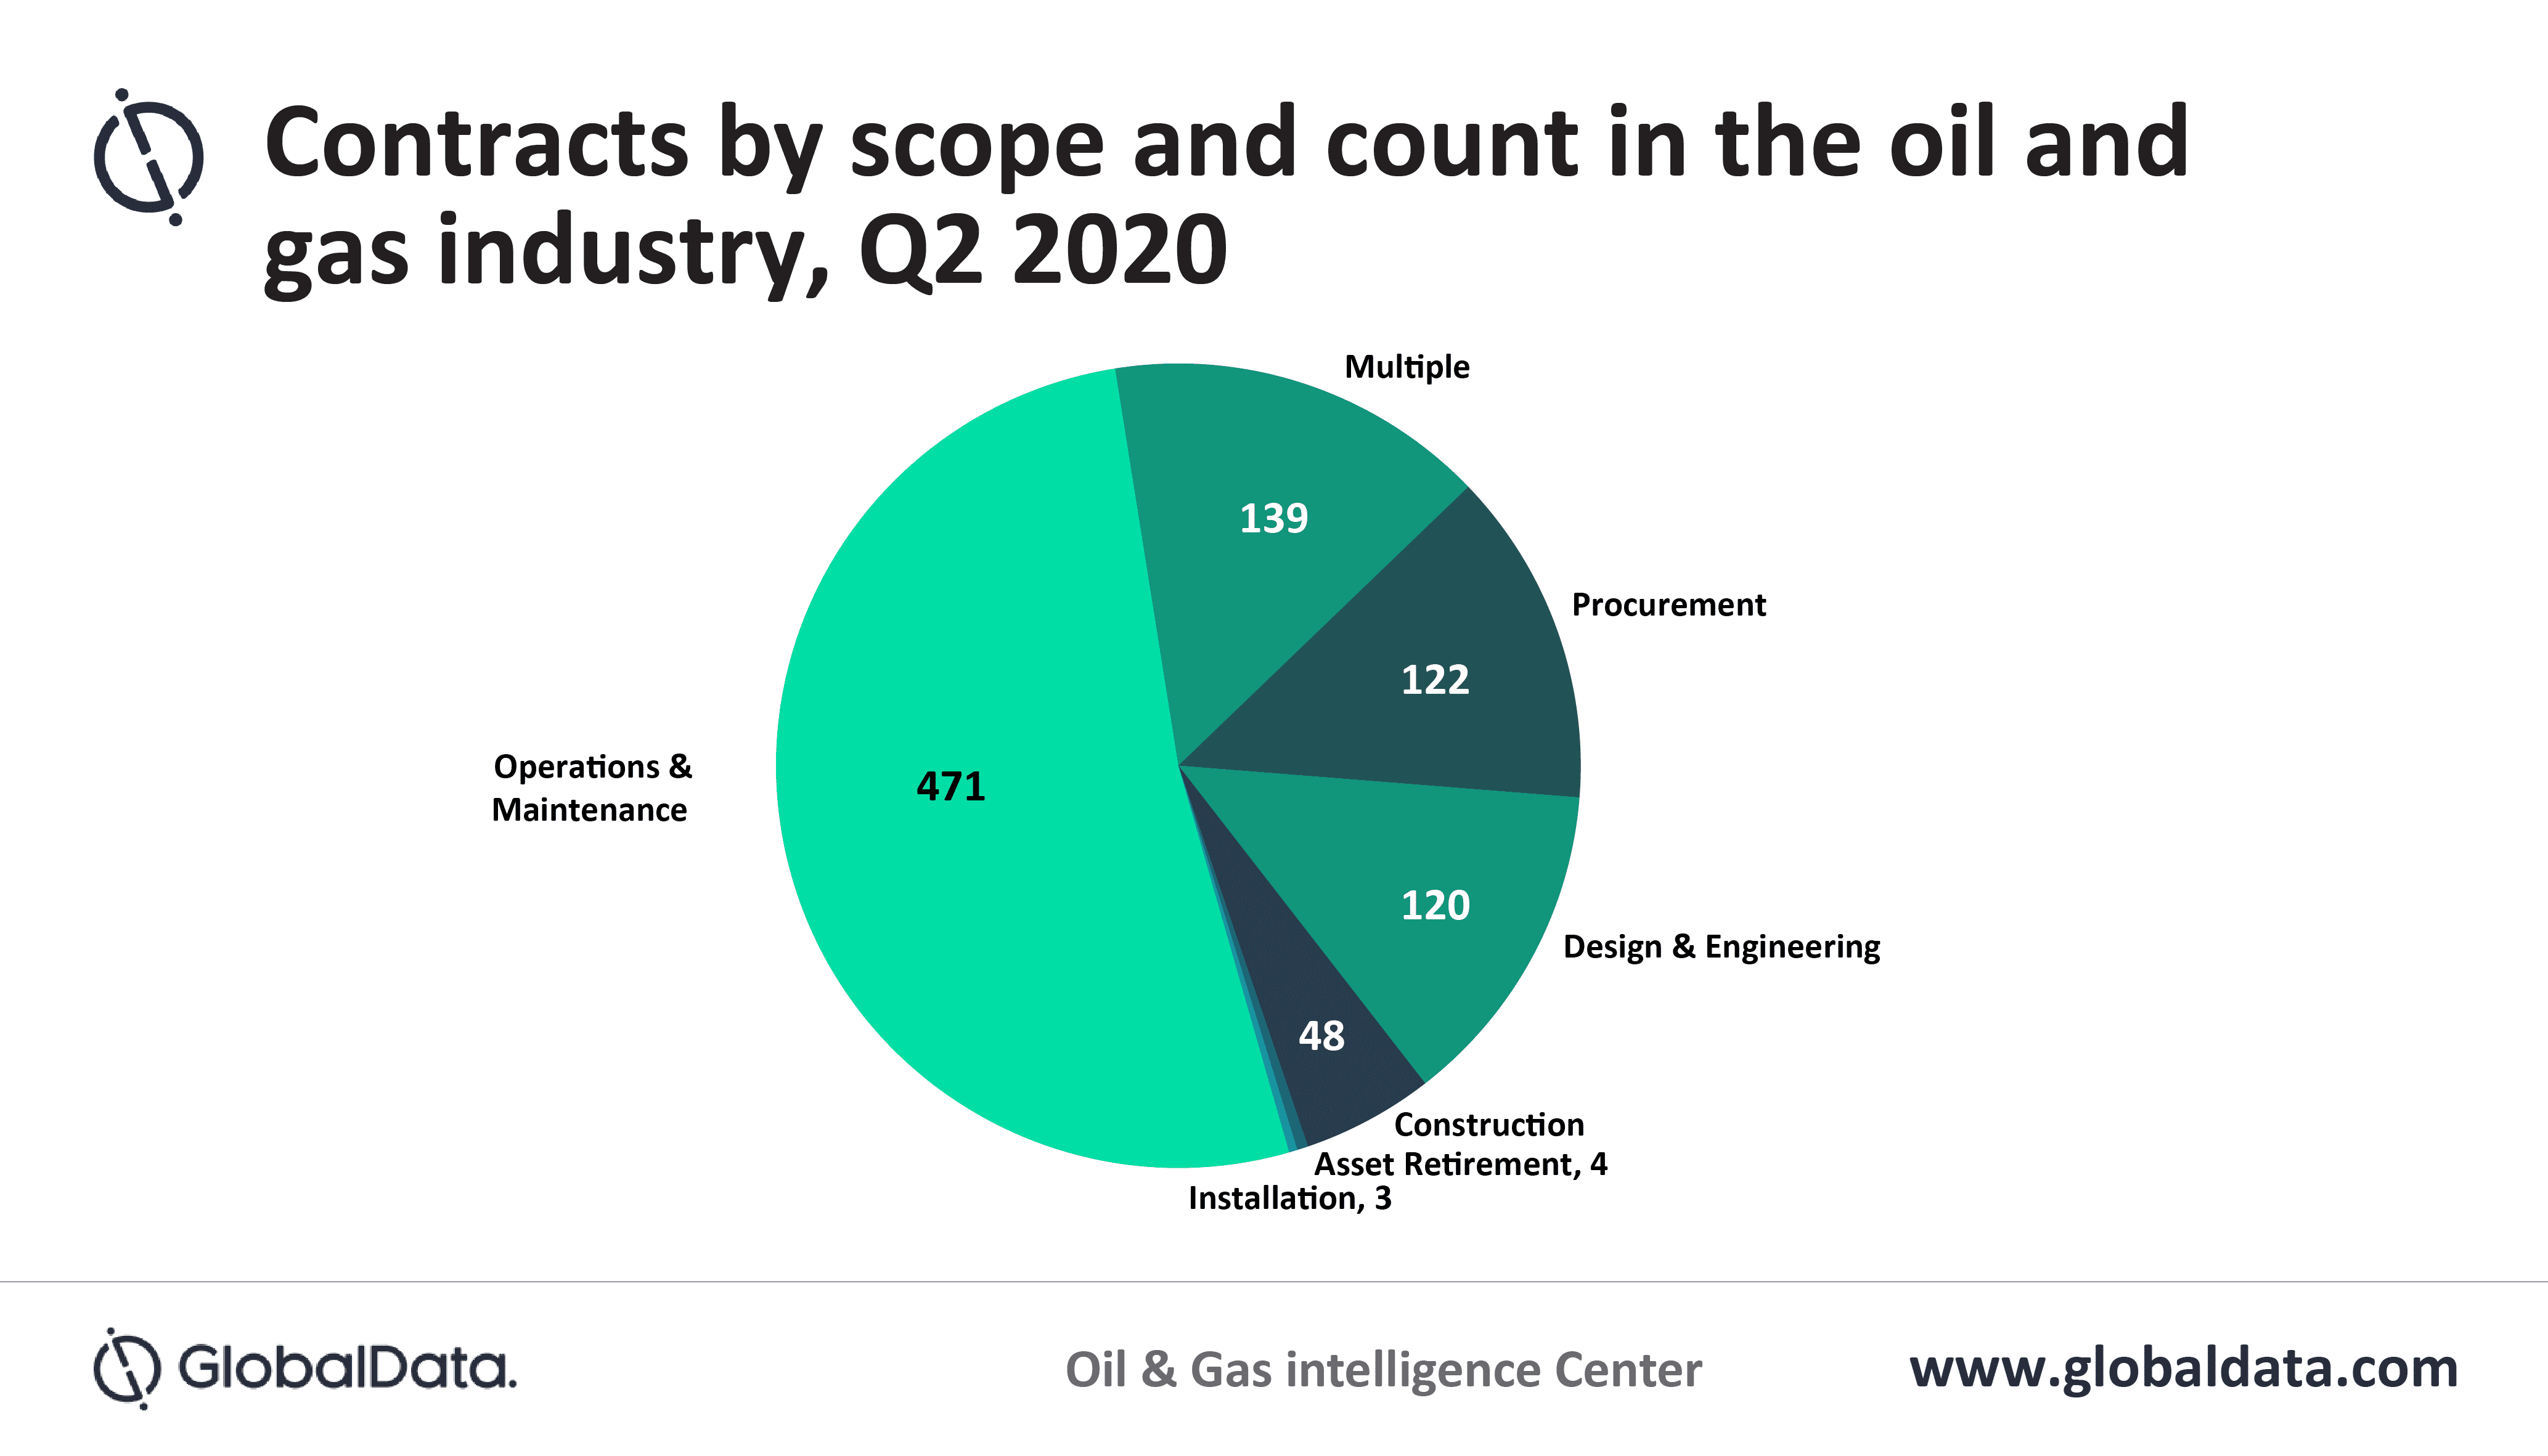 Global oil and gas contracts activity continued downtrend during Q2 2020